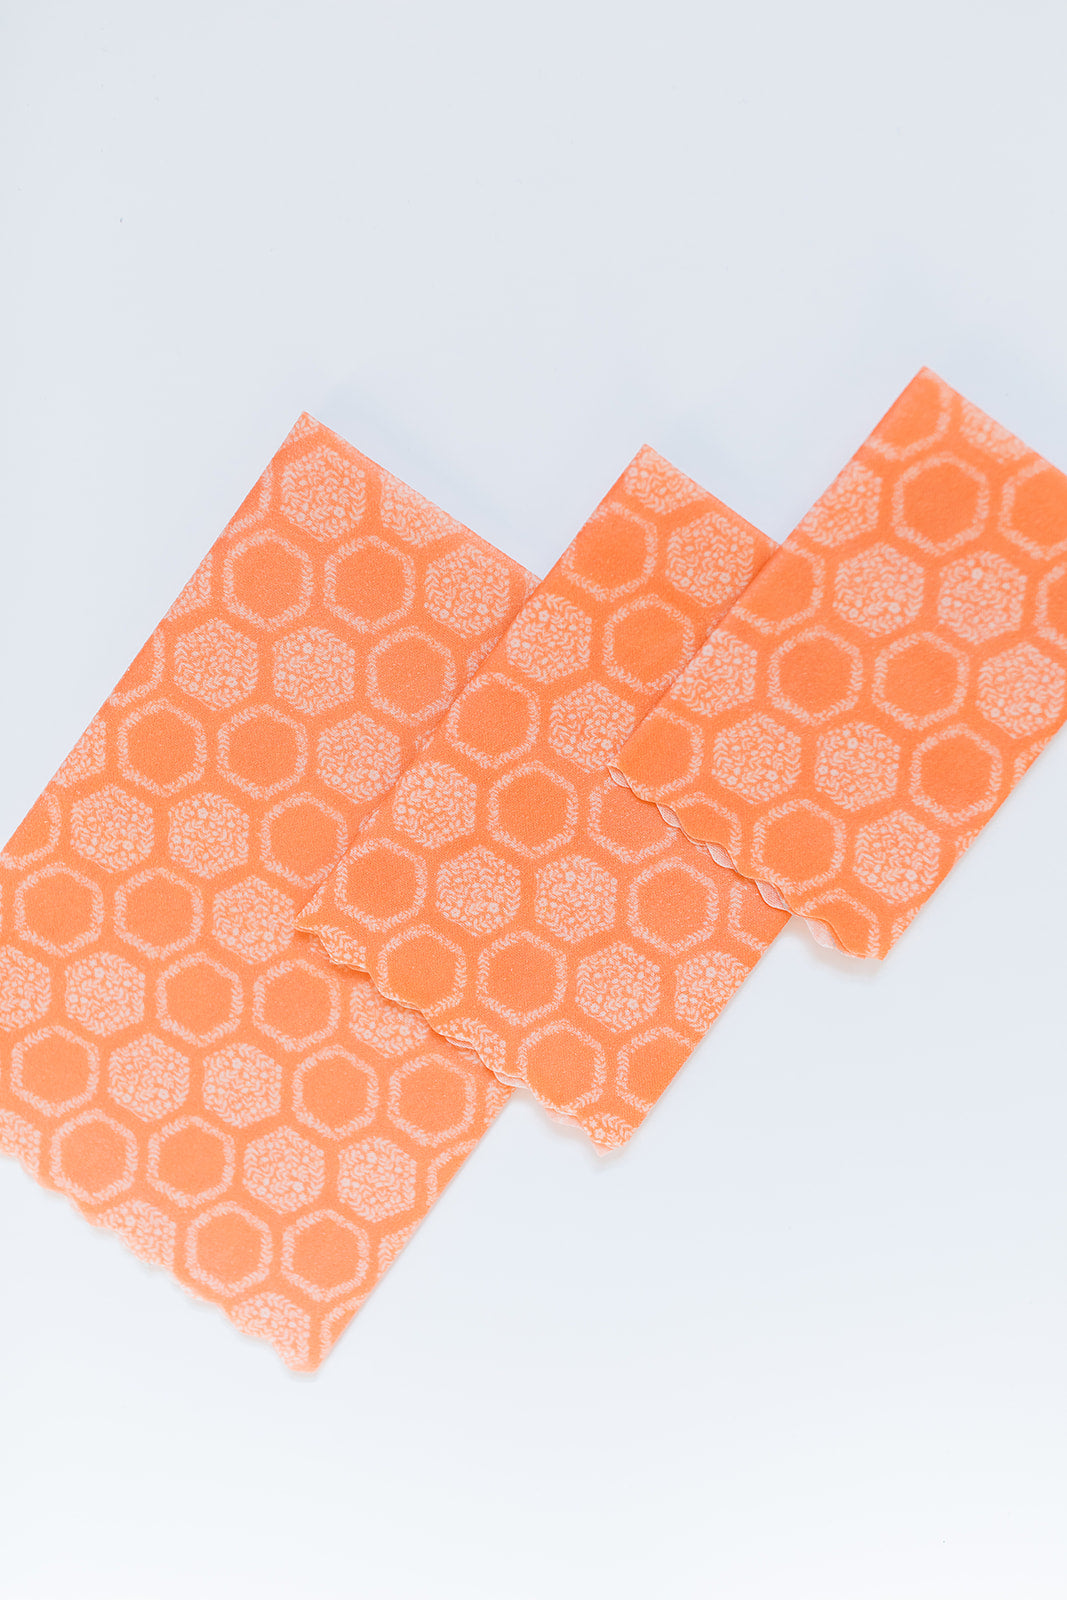 Large Beeswax Wraps (Set of 2) – Nothing Fancy SupplyCo.